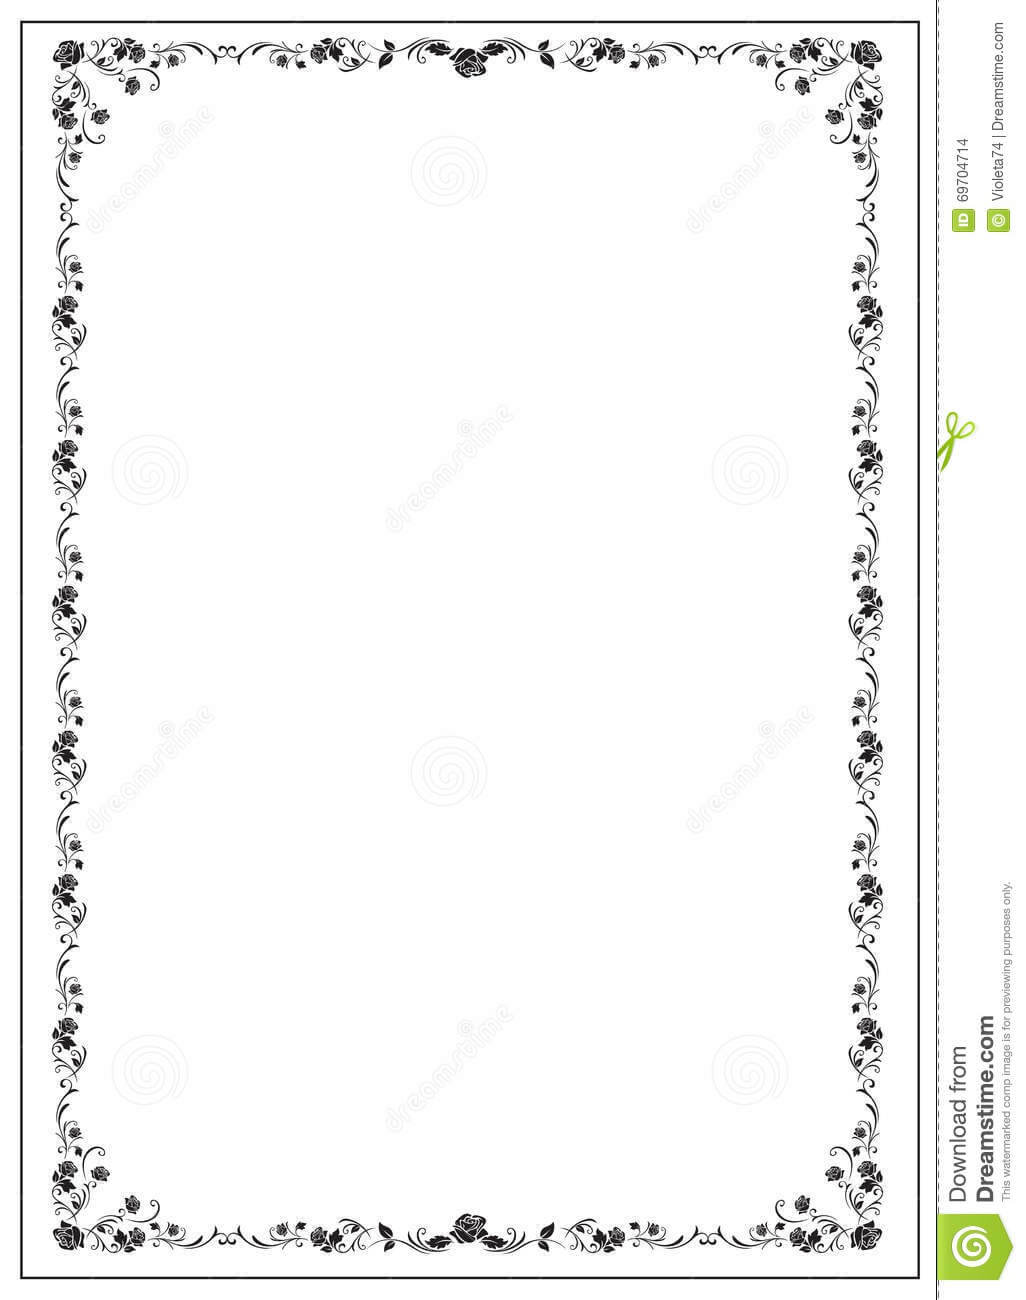 Certificate Template With Floral Rose Elements. Stock Vector Inside Certificate Border Design Templates